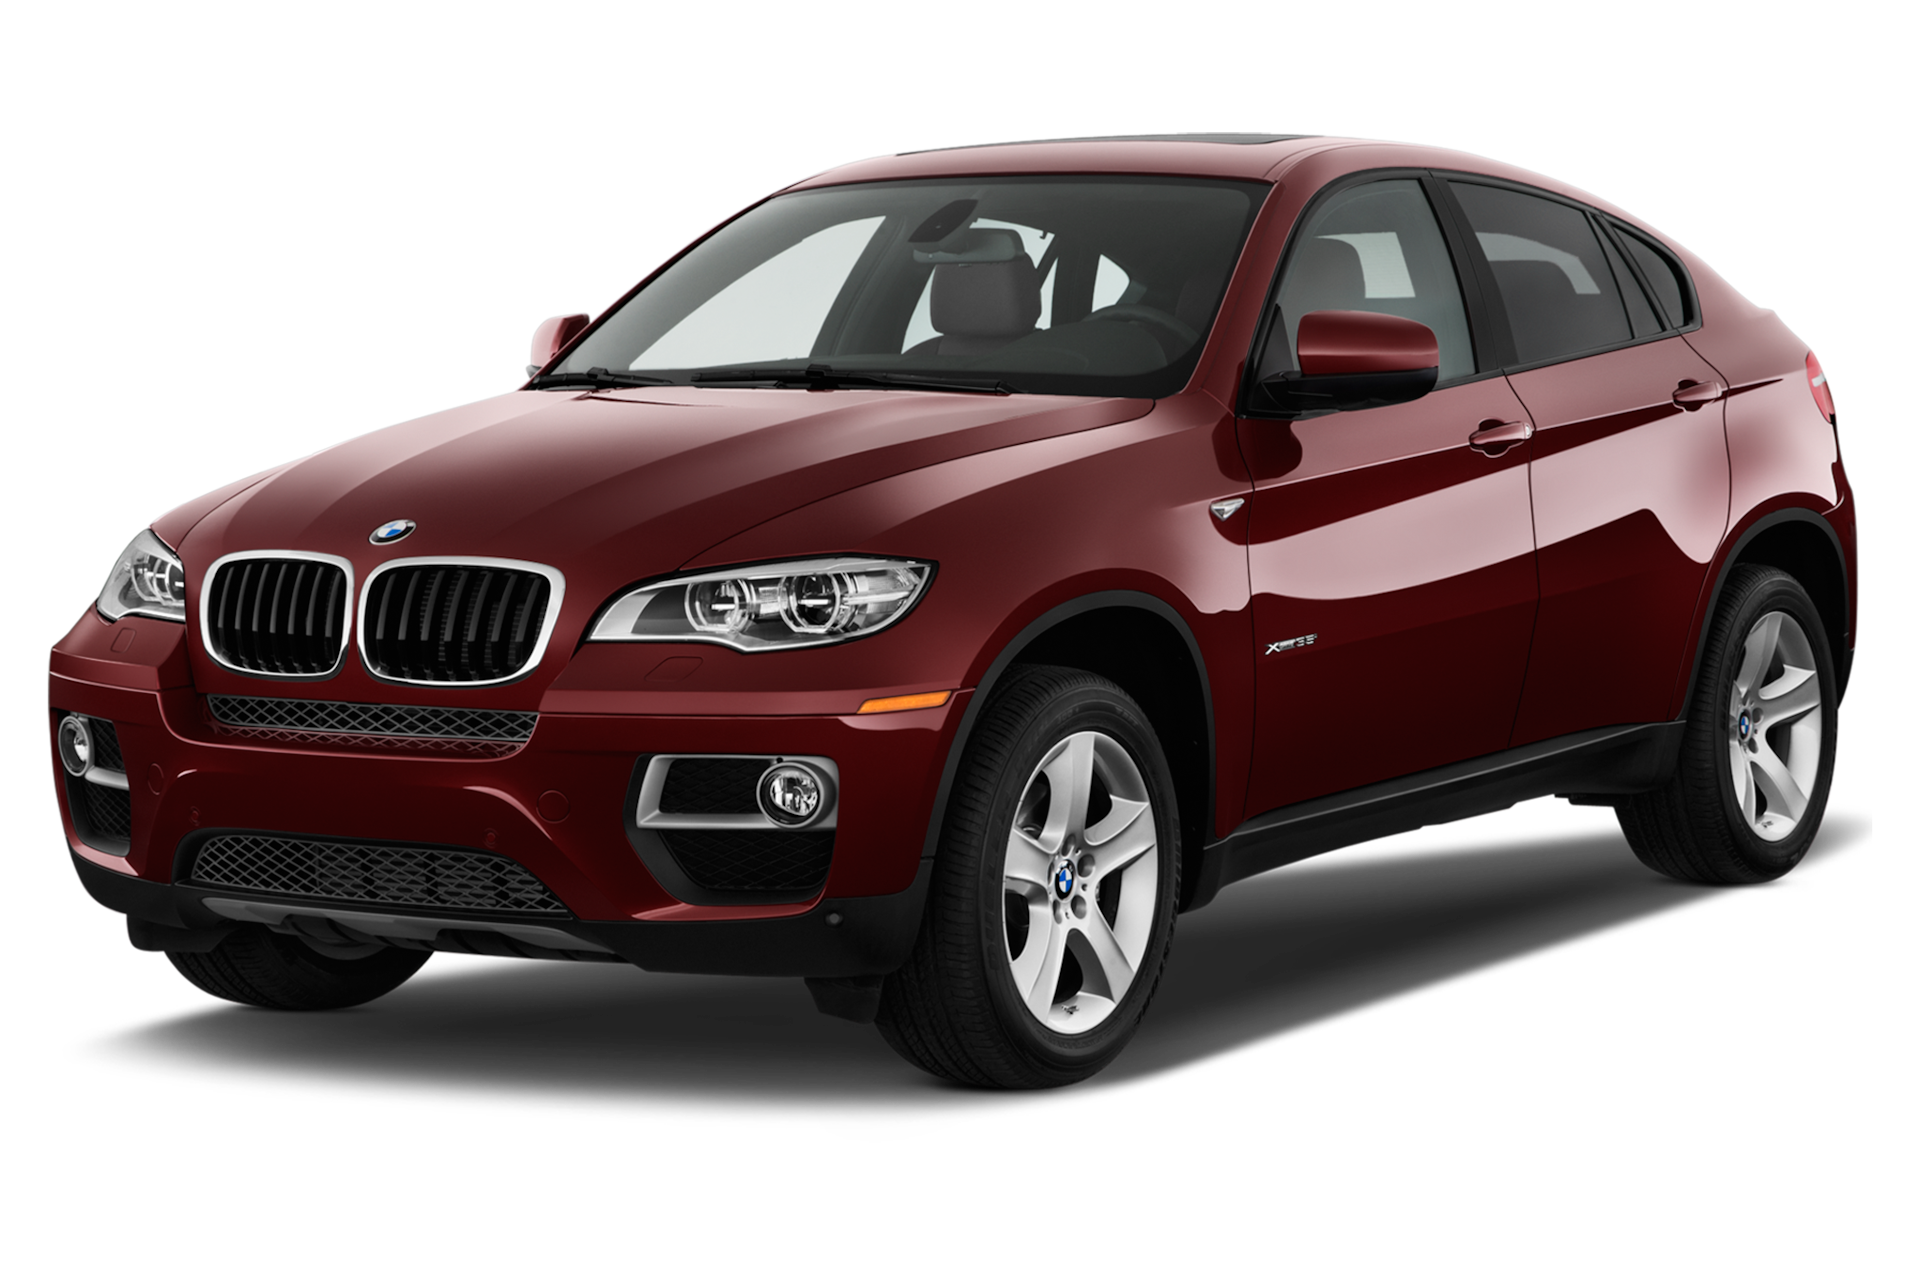 2013 BMW X6 Prices, Reviews, and Photos - MotorTrend